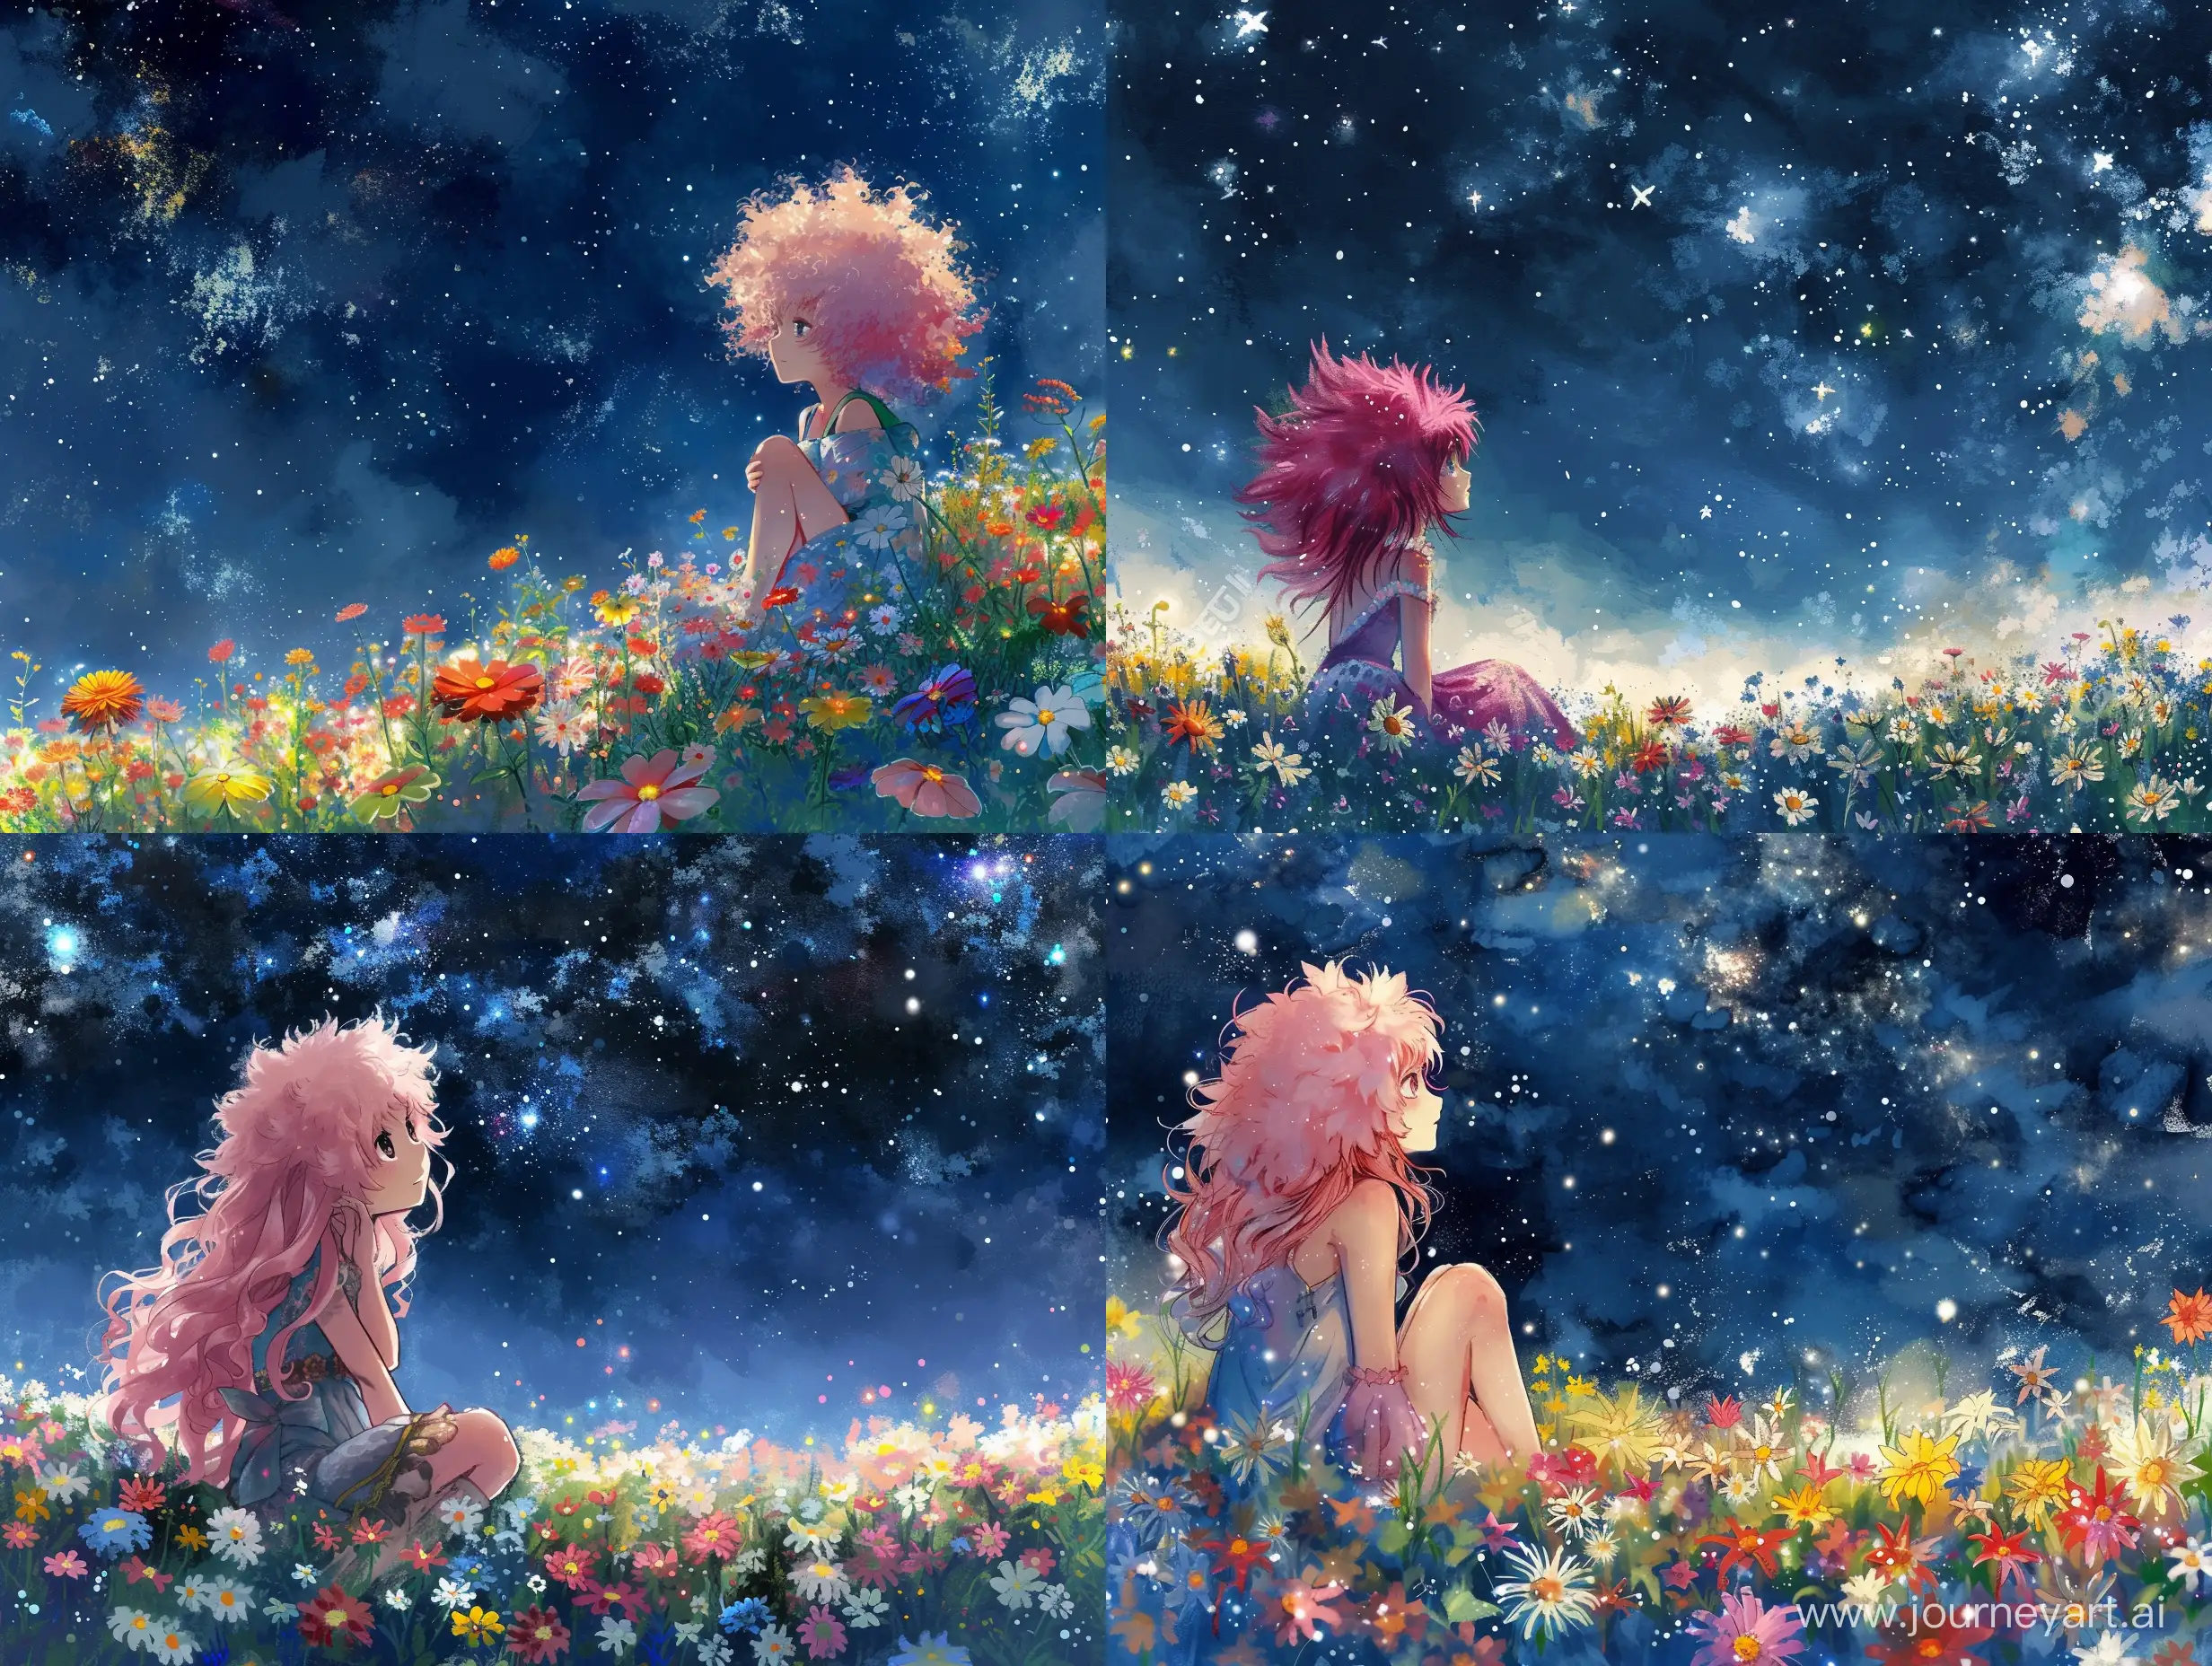 A cute anime girl with fluffy pink hair, sitting in a field of flowers under a starry night sky, Makoto Shinkai, pastel, water paint, Dynamic